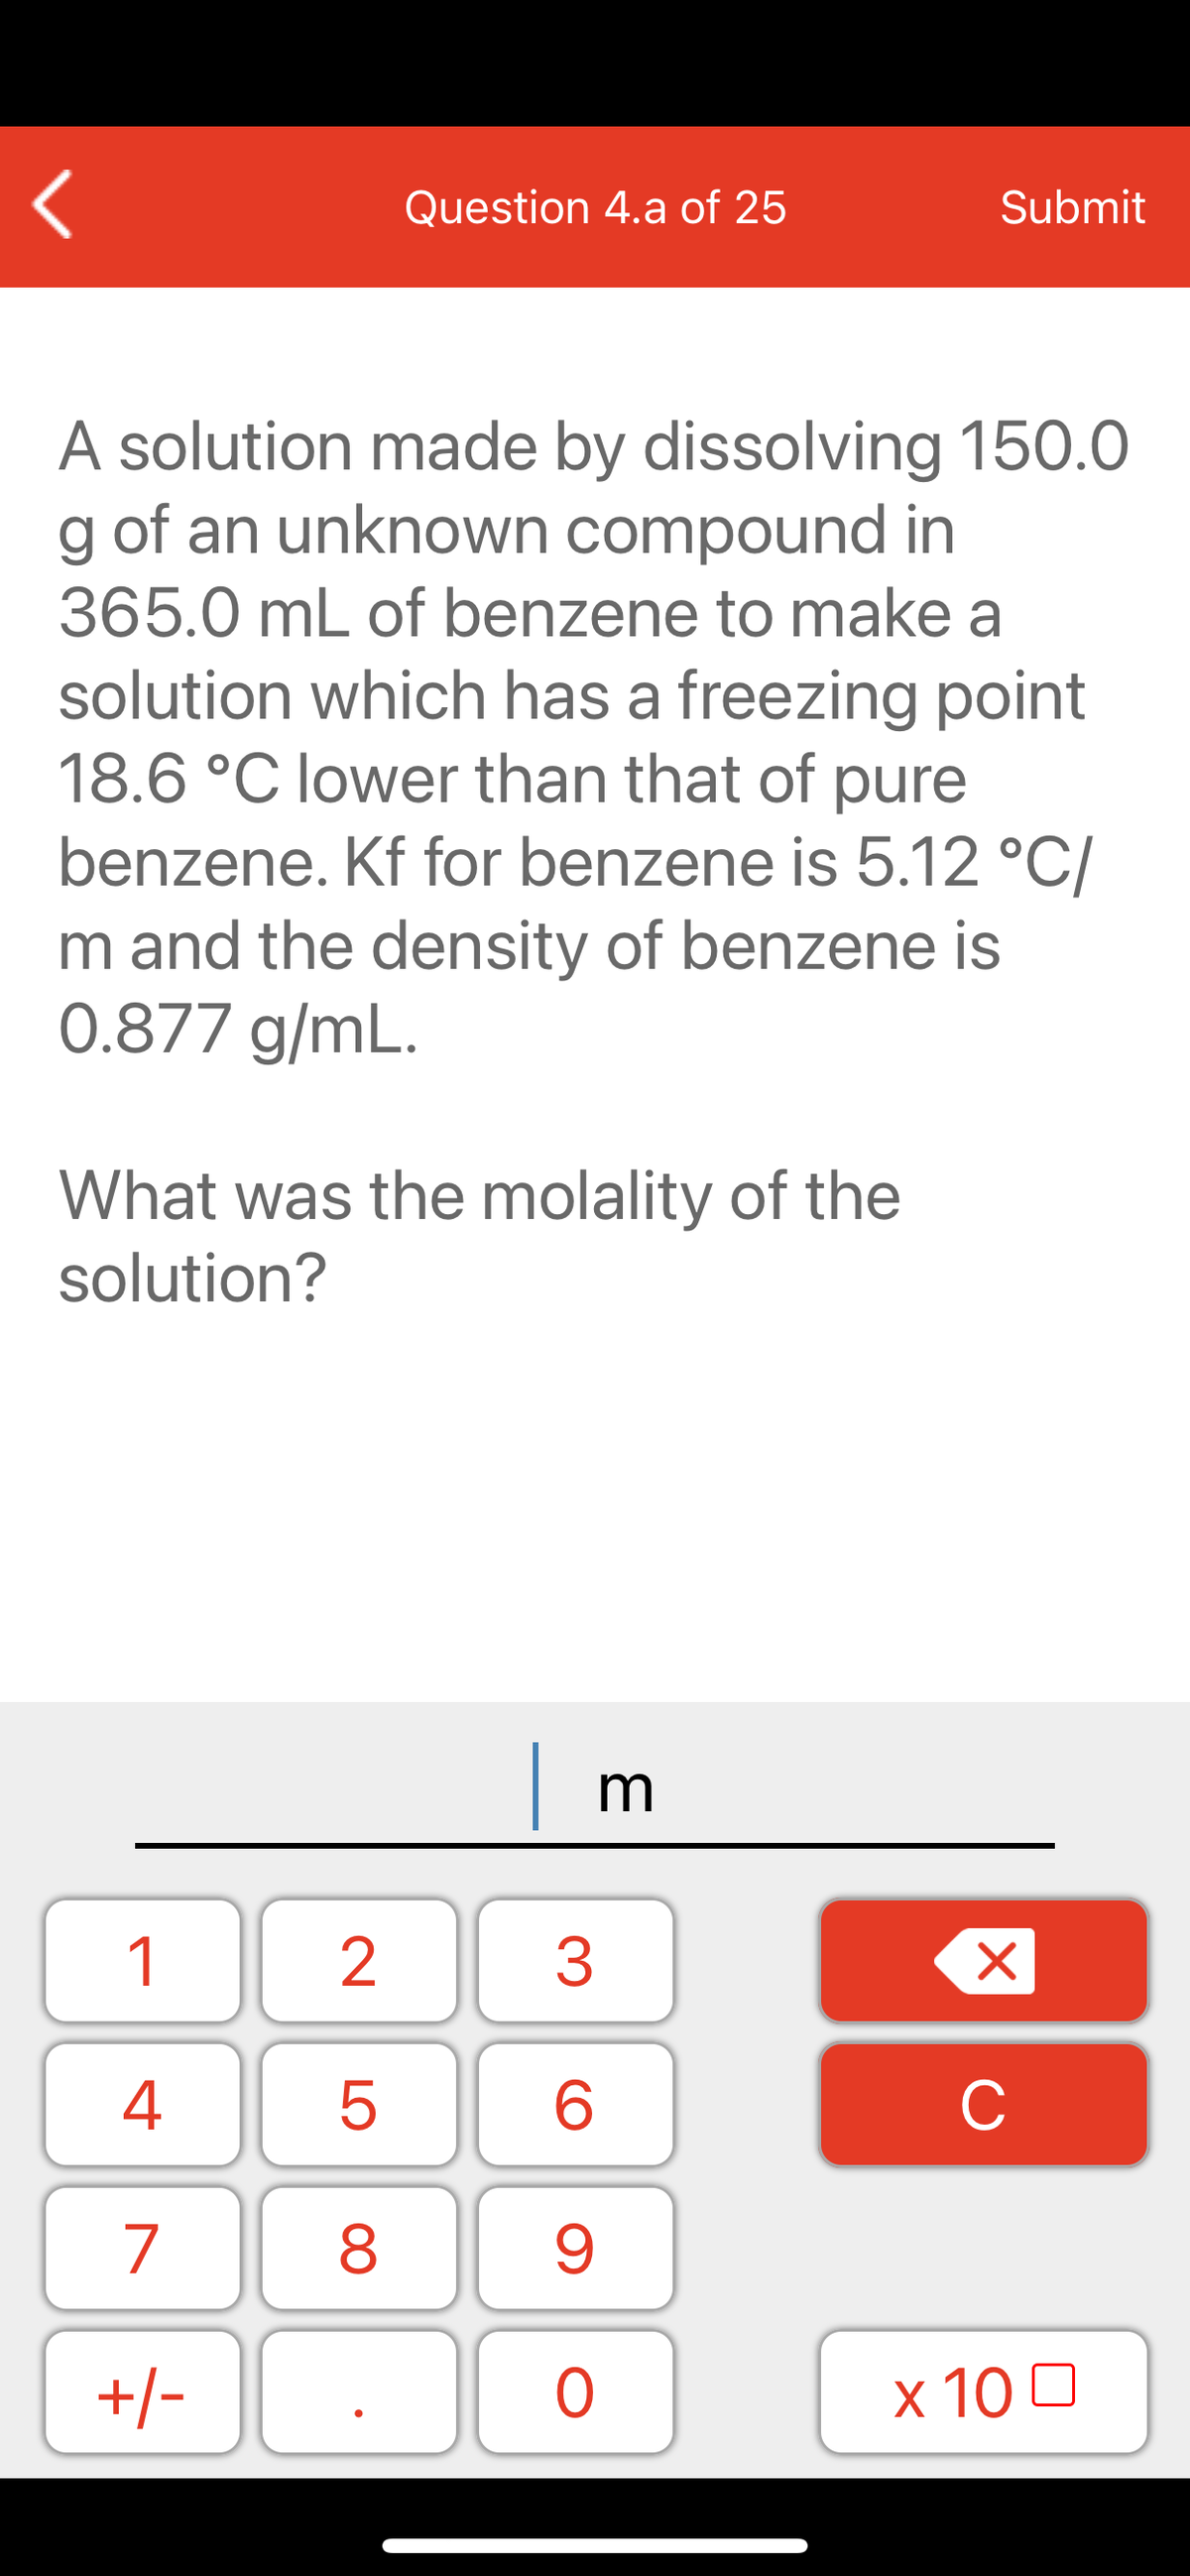 Question 4.a of 25
Submit
A solution made by dissolving 150.0
g of an unknown compound in
365.0 mL of benzene to make a
solution which has a freezing point
18.6 °C lower than that of pure
benzene. Kf for benzene is 5.12 °C/
m and the density of benzene is
0.877 g/mL.
What was the molality of the
solution?
| r
1
2
3
C
7
9.
+/-
x 10 0
LO
00
